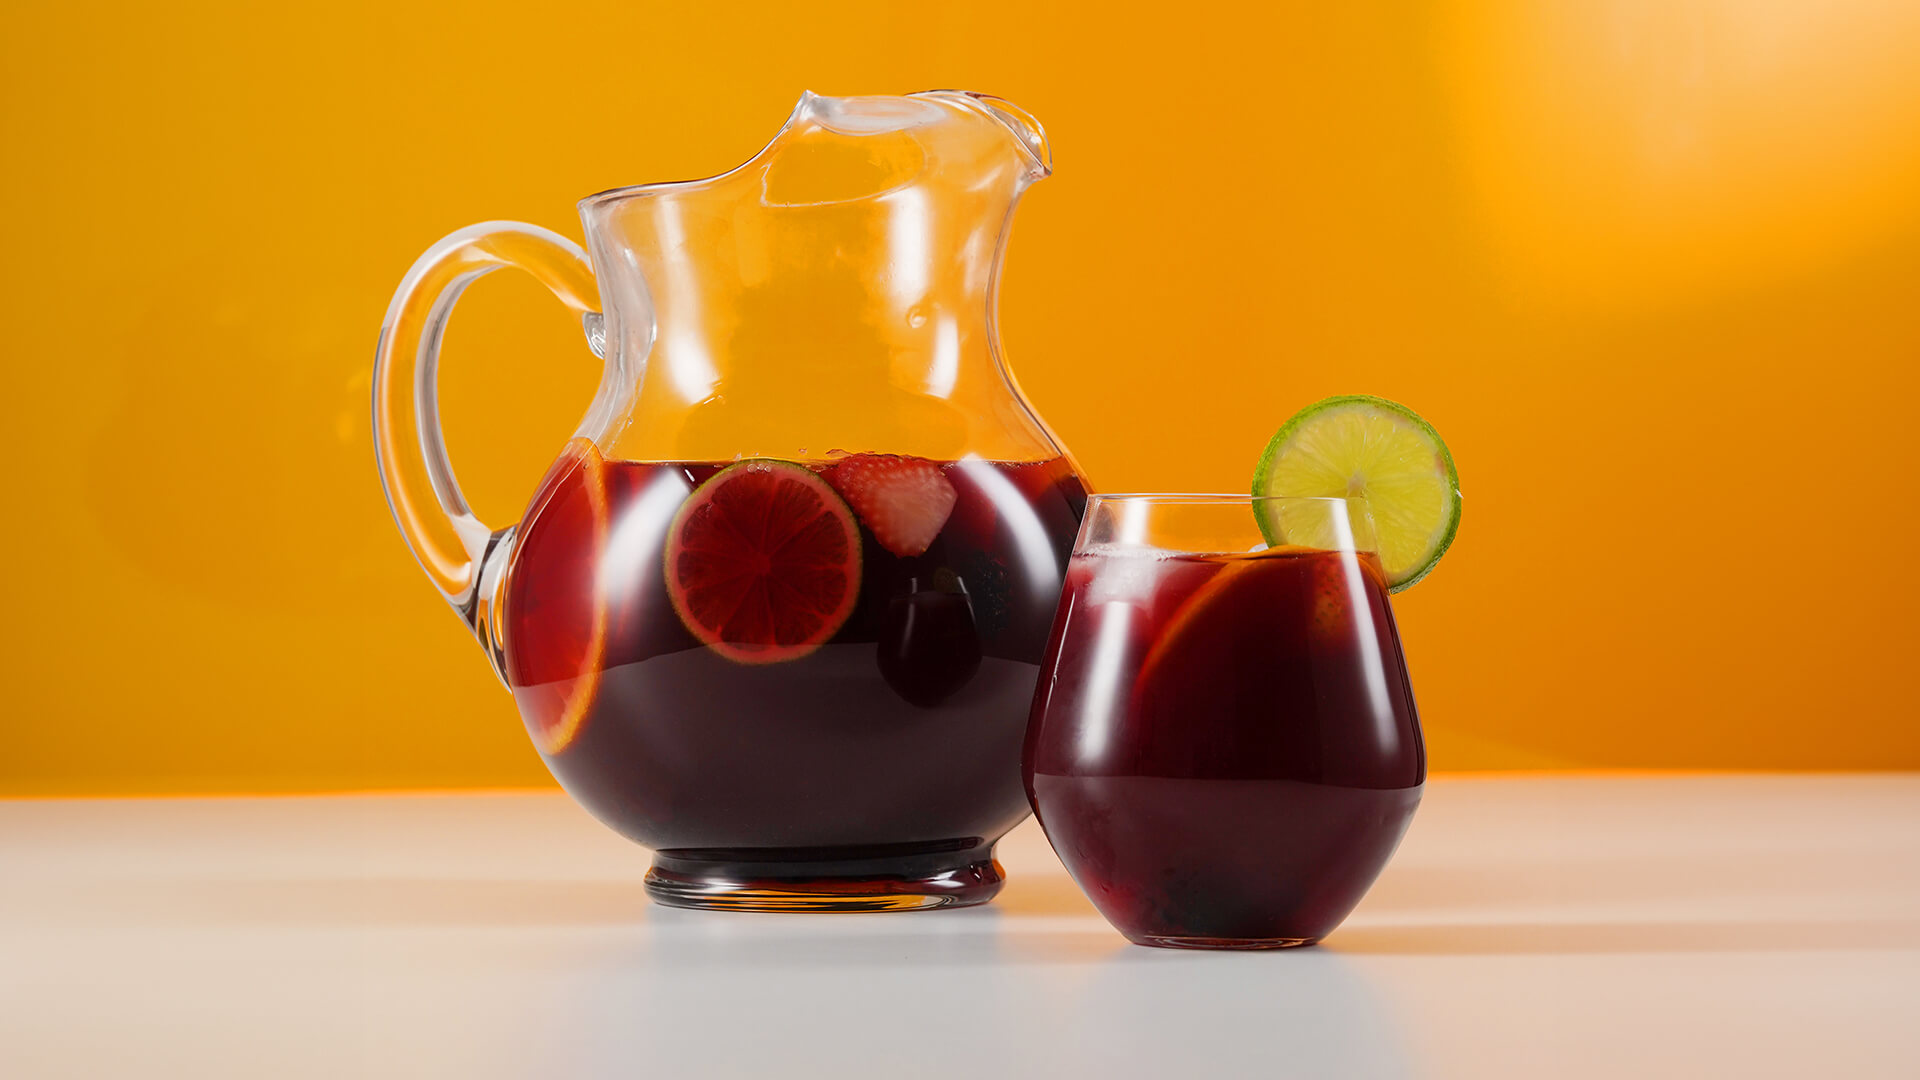 A pitcher of red wine sangria.